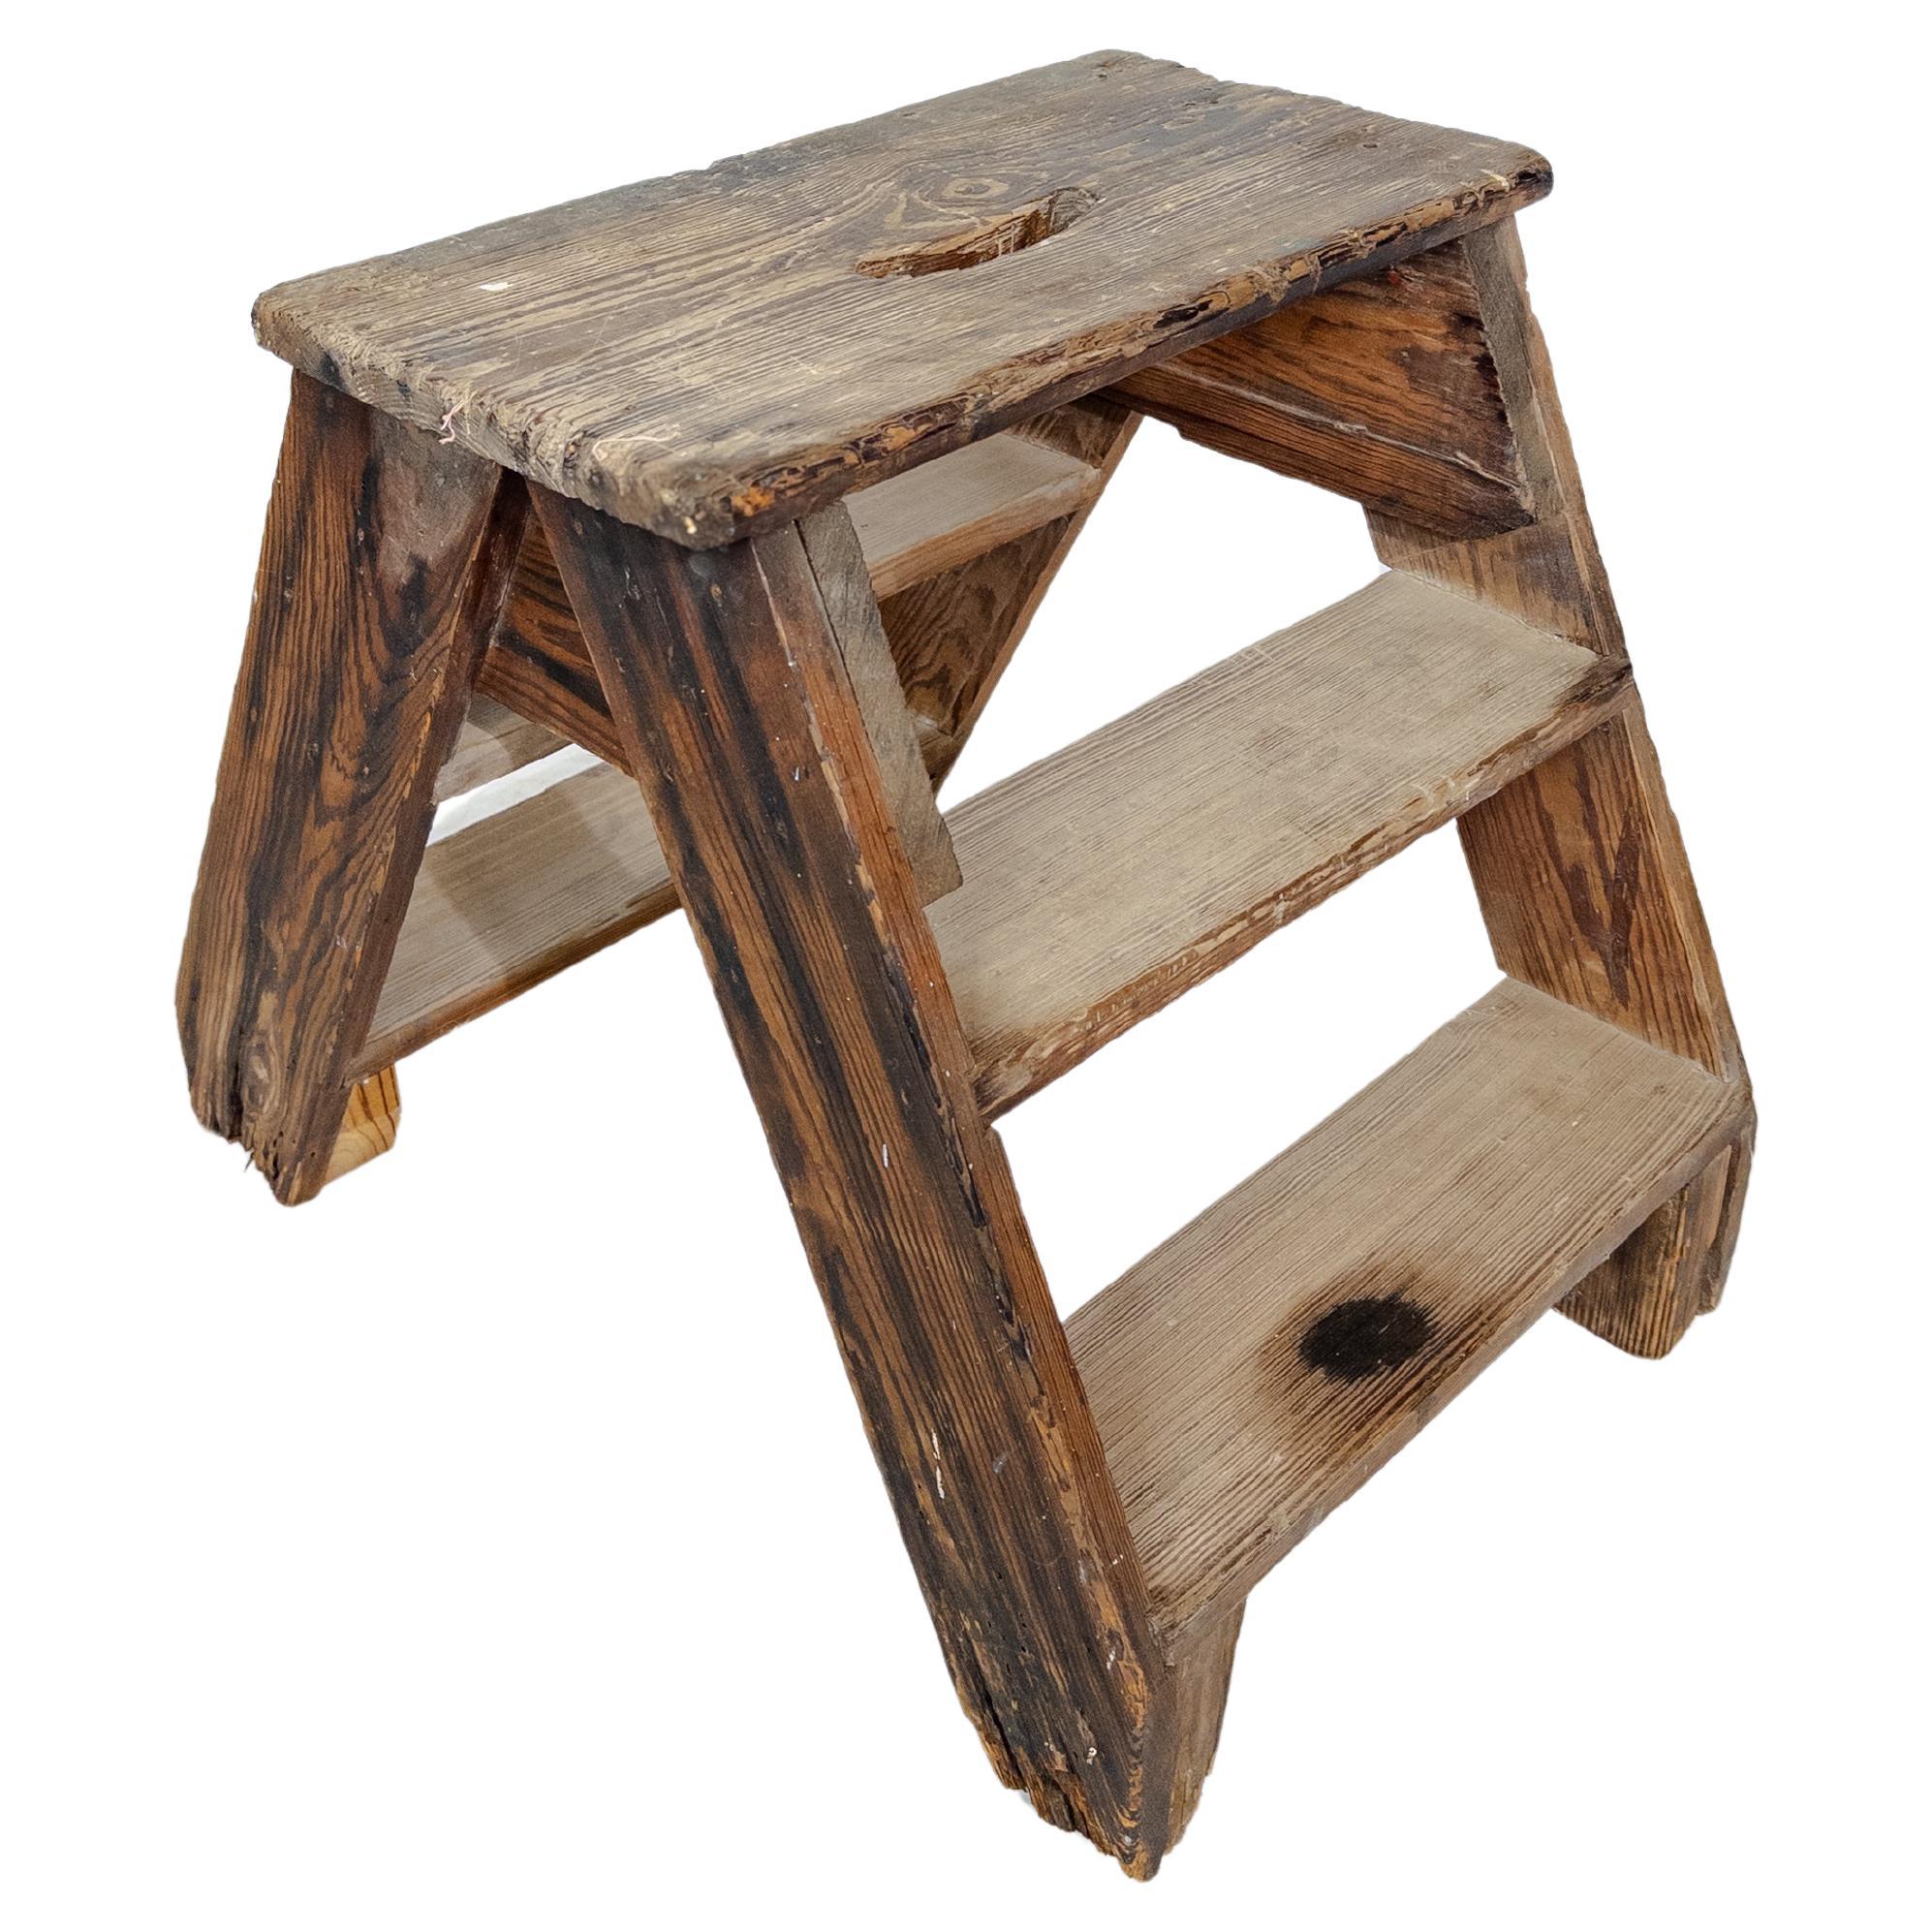 Antique Step Stool For Sale